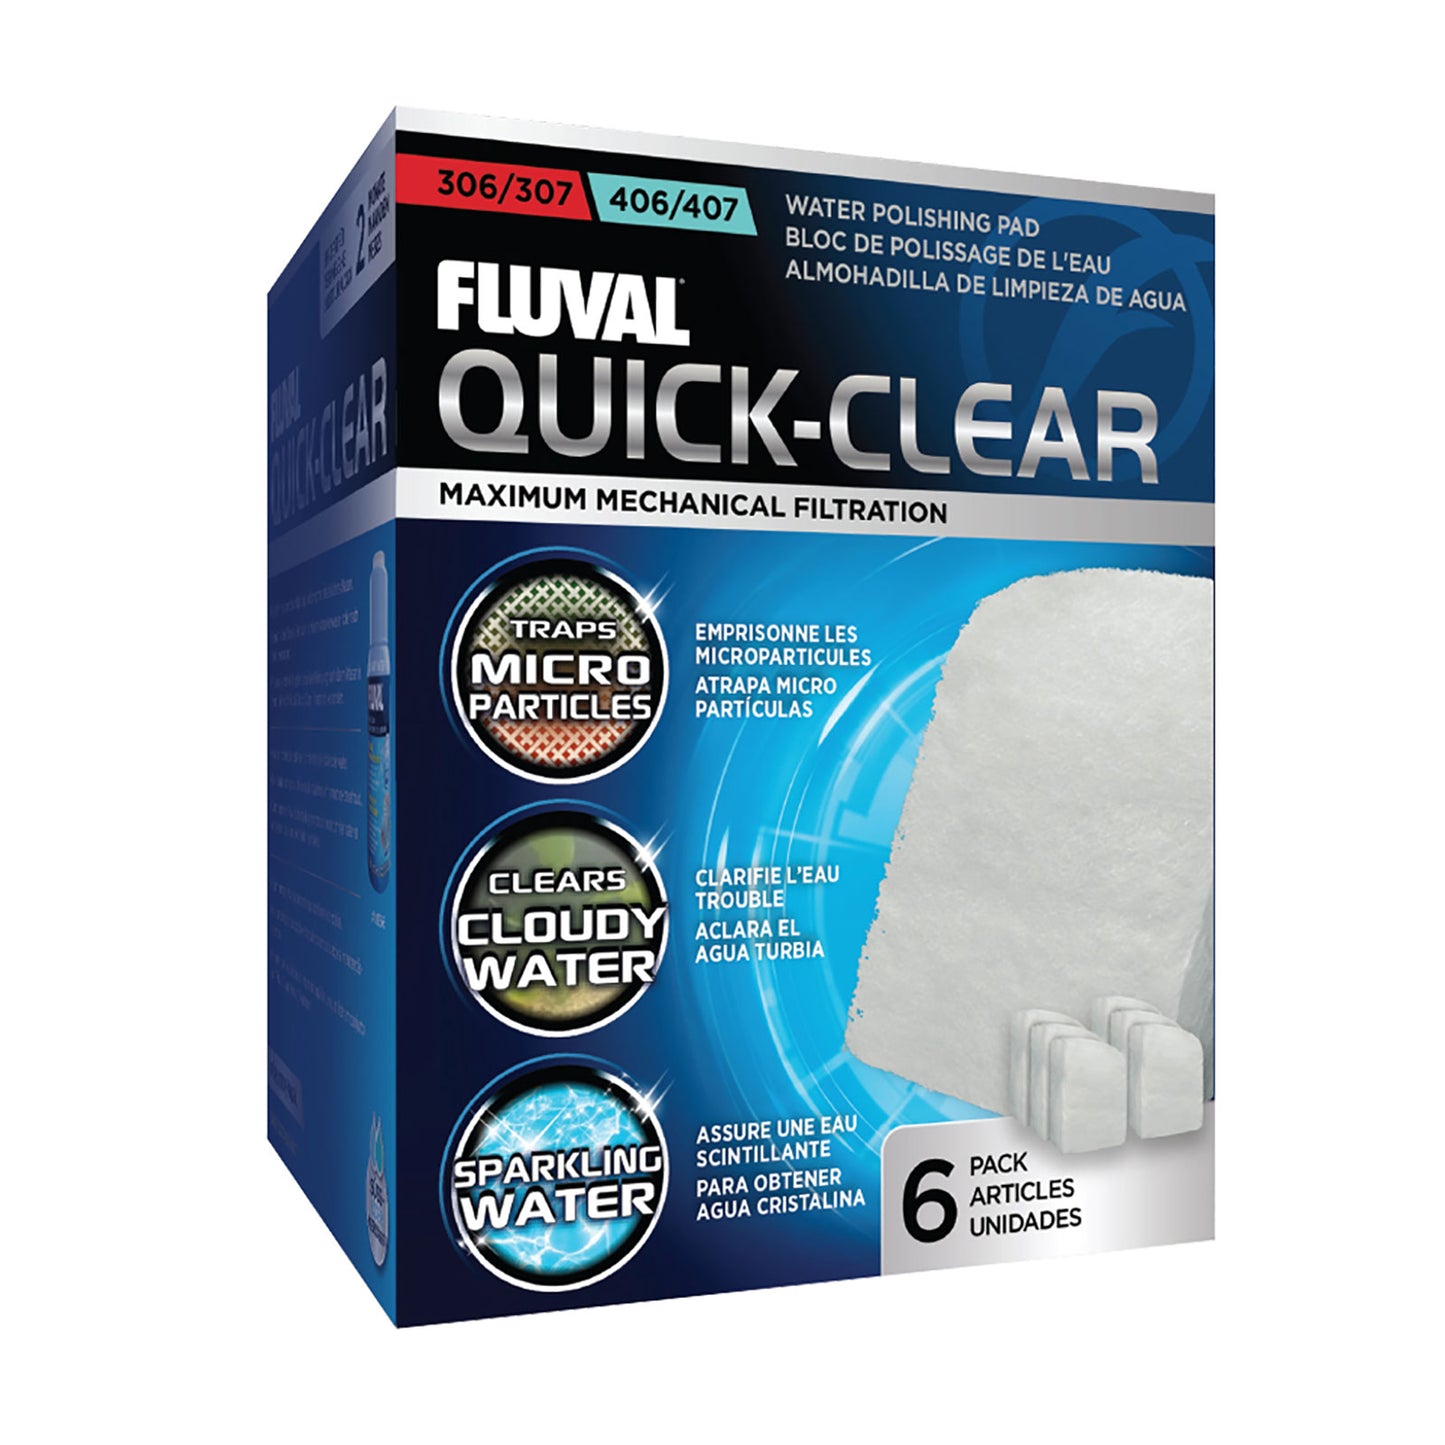 Fluval 306/406 and 307/407 Quick-Clear - 6 pack